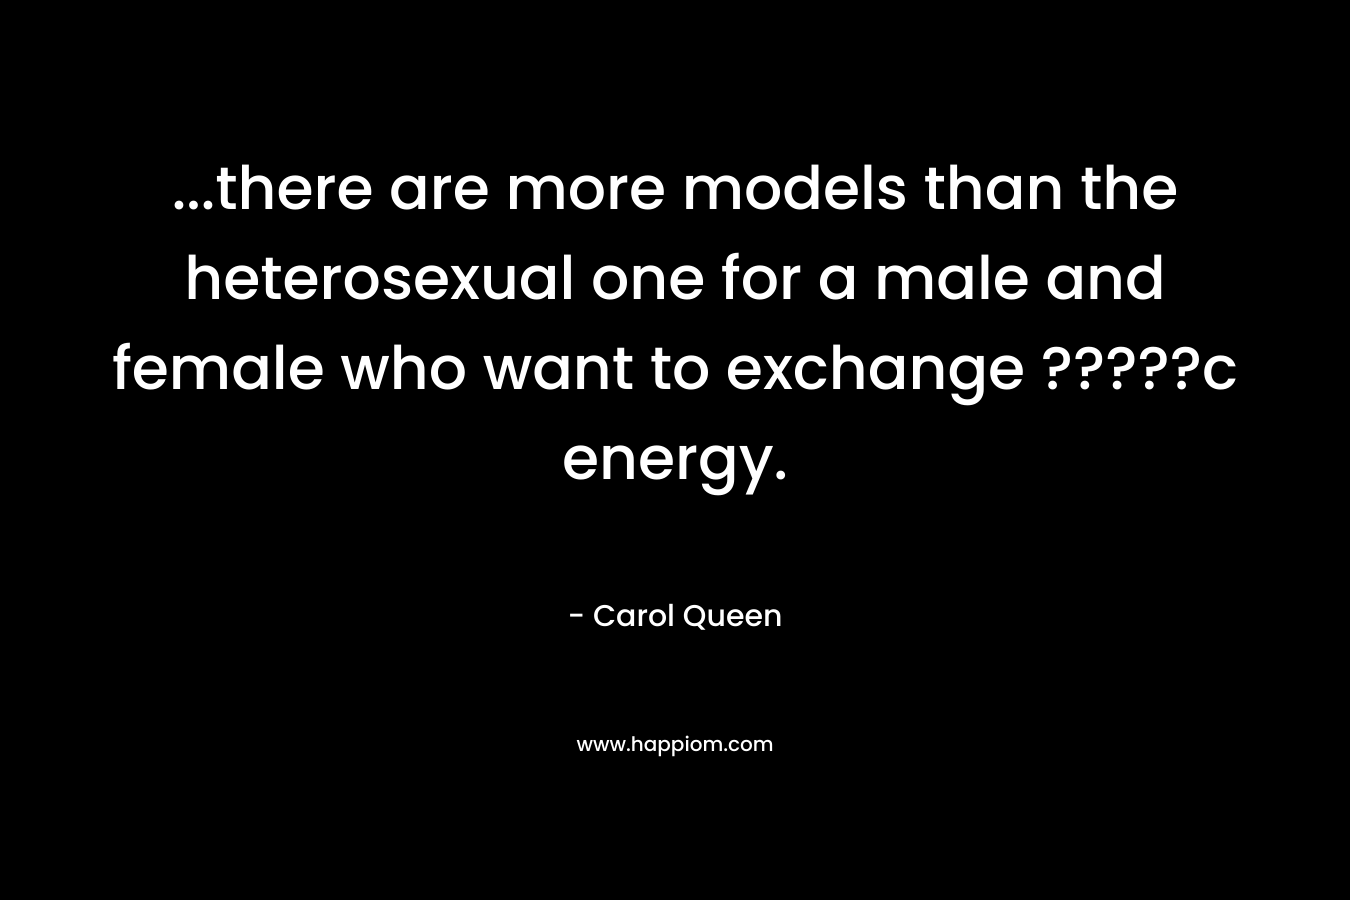 …there are more models than the heterosexual one for a male and female who want to exchange ?????c energy. – Carol Queen